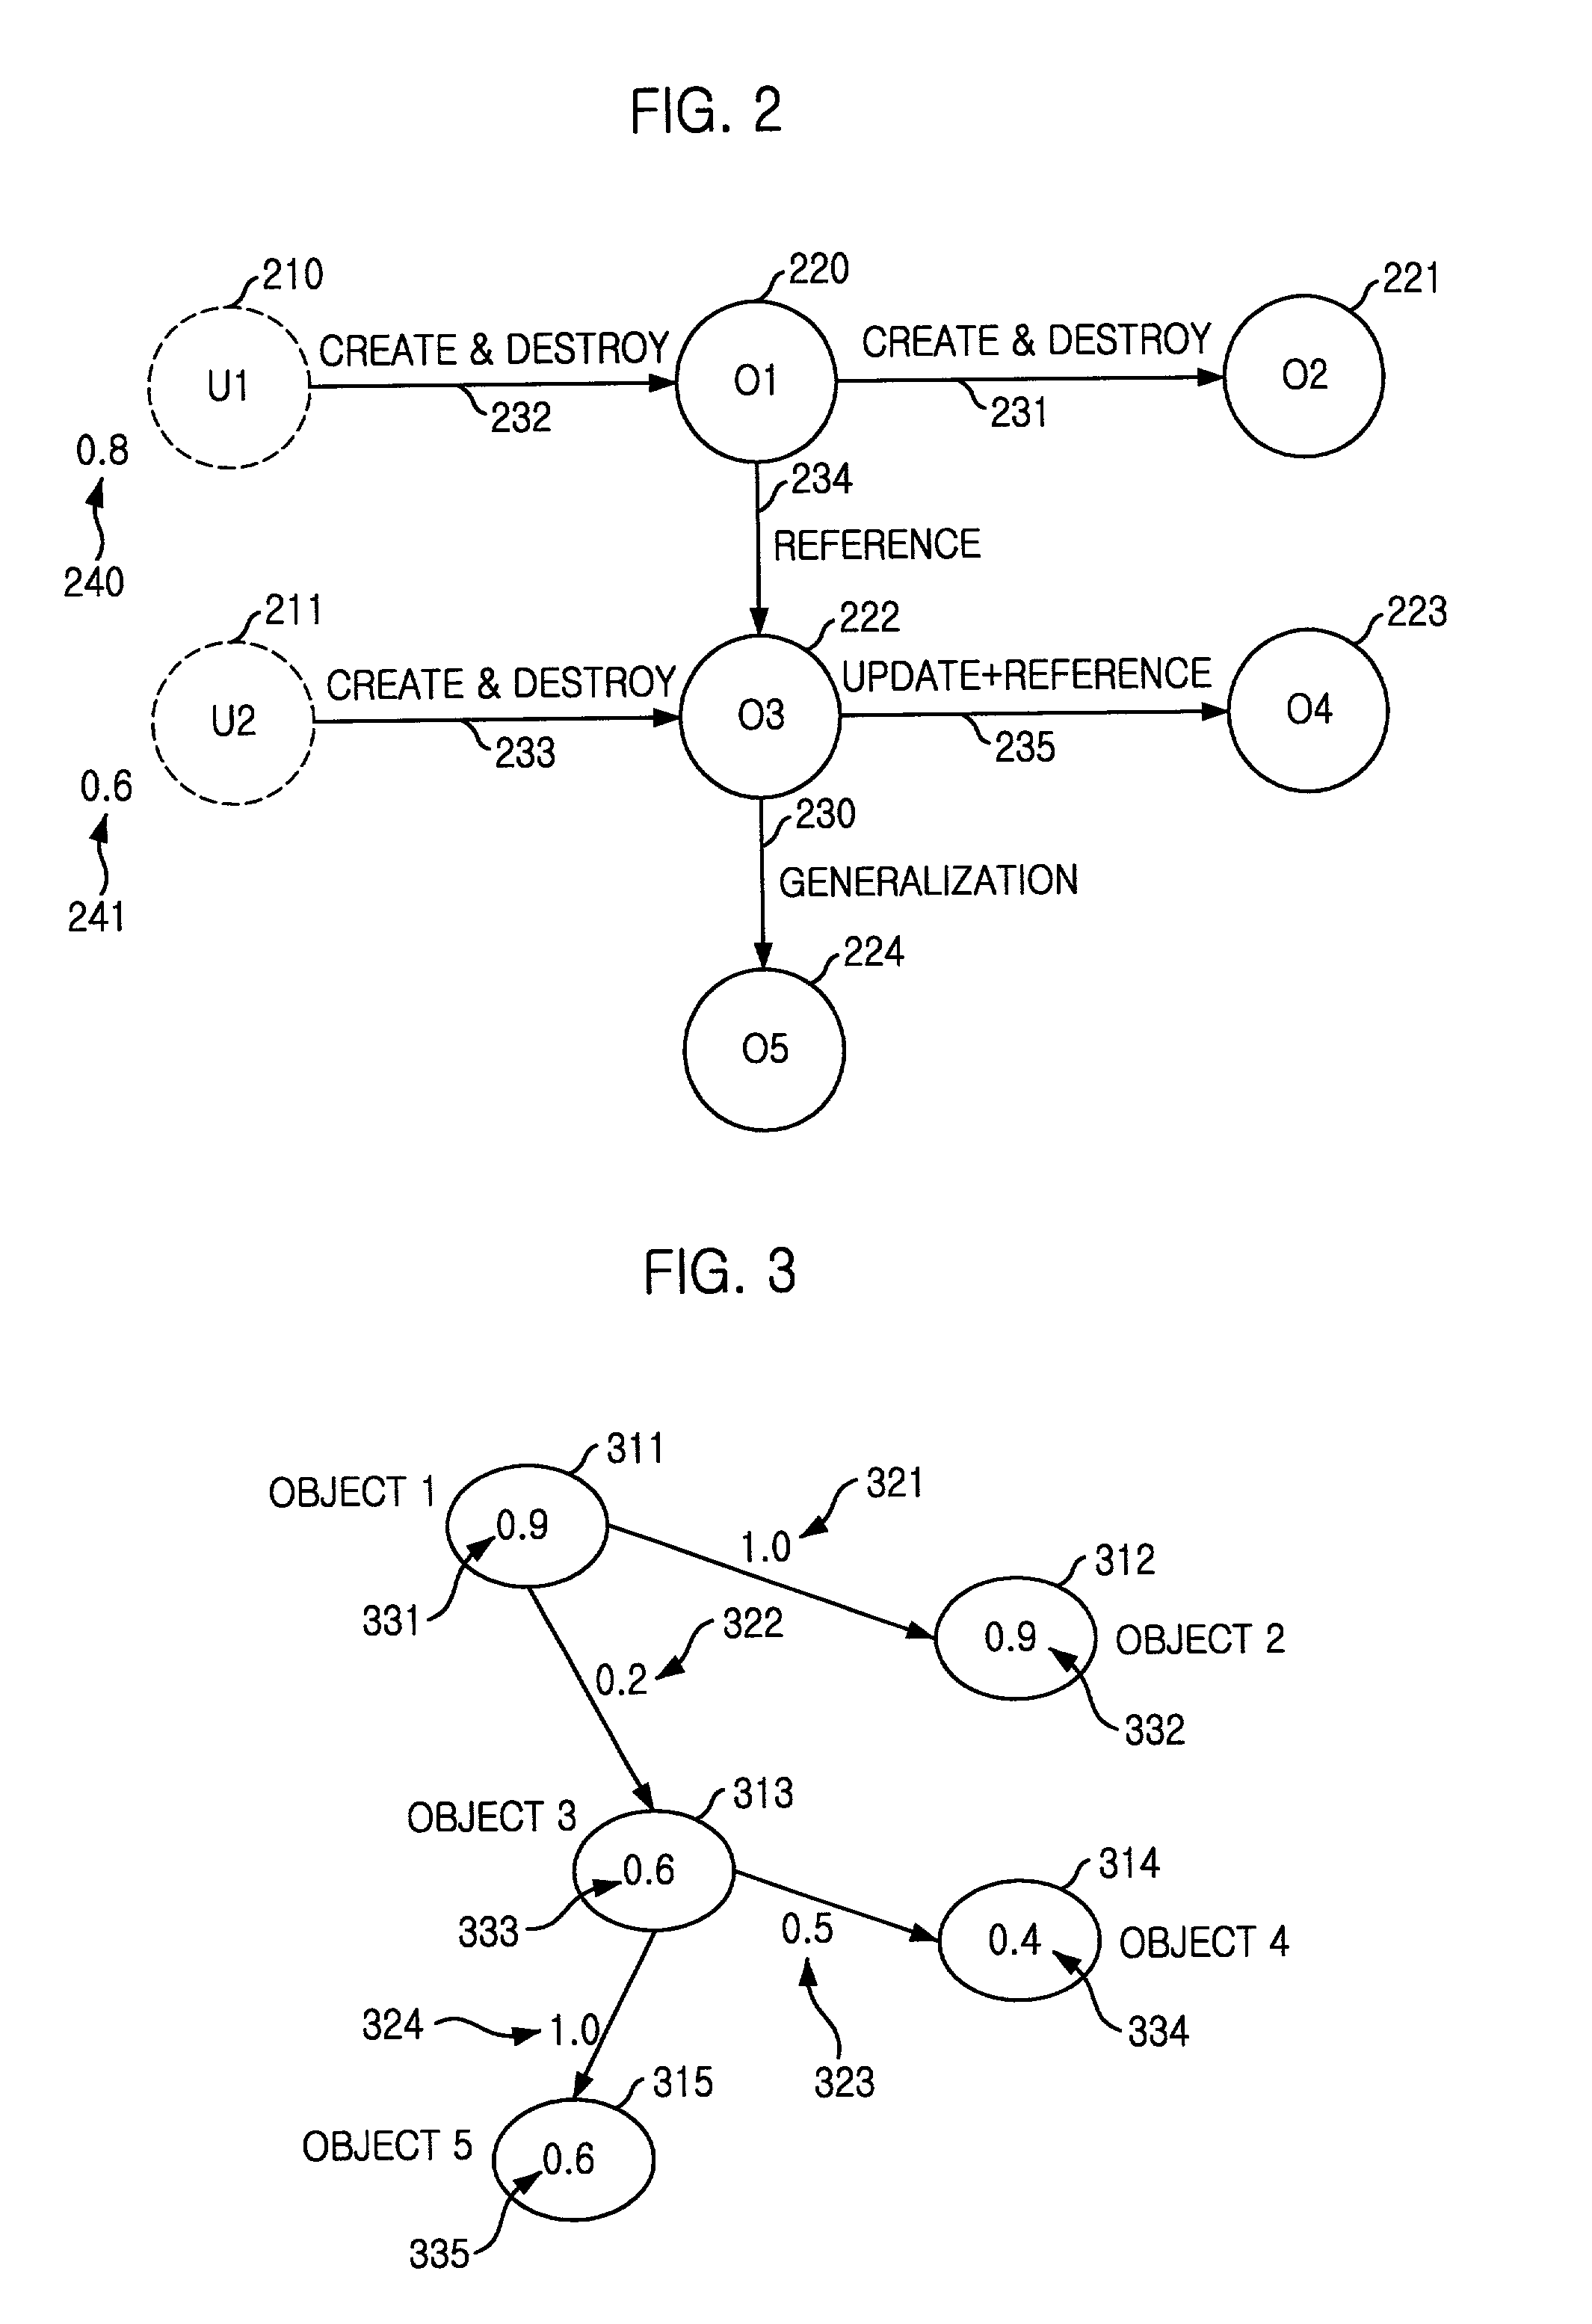 Method and apparatus for identifying software components using object relationships and object usages in use cases